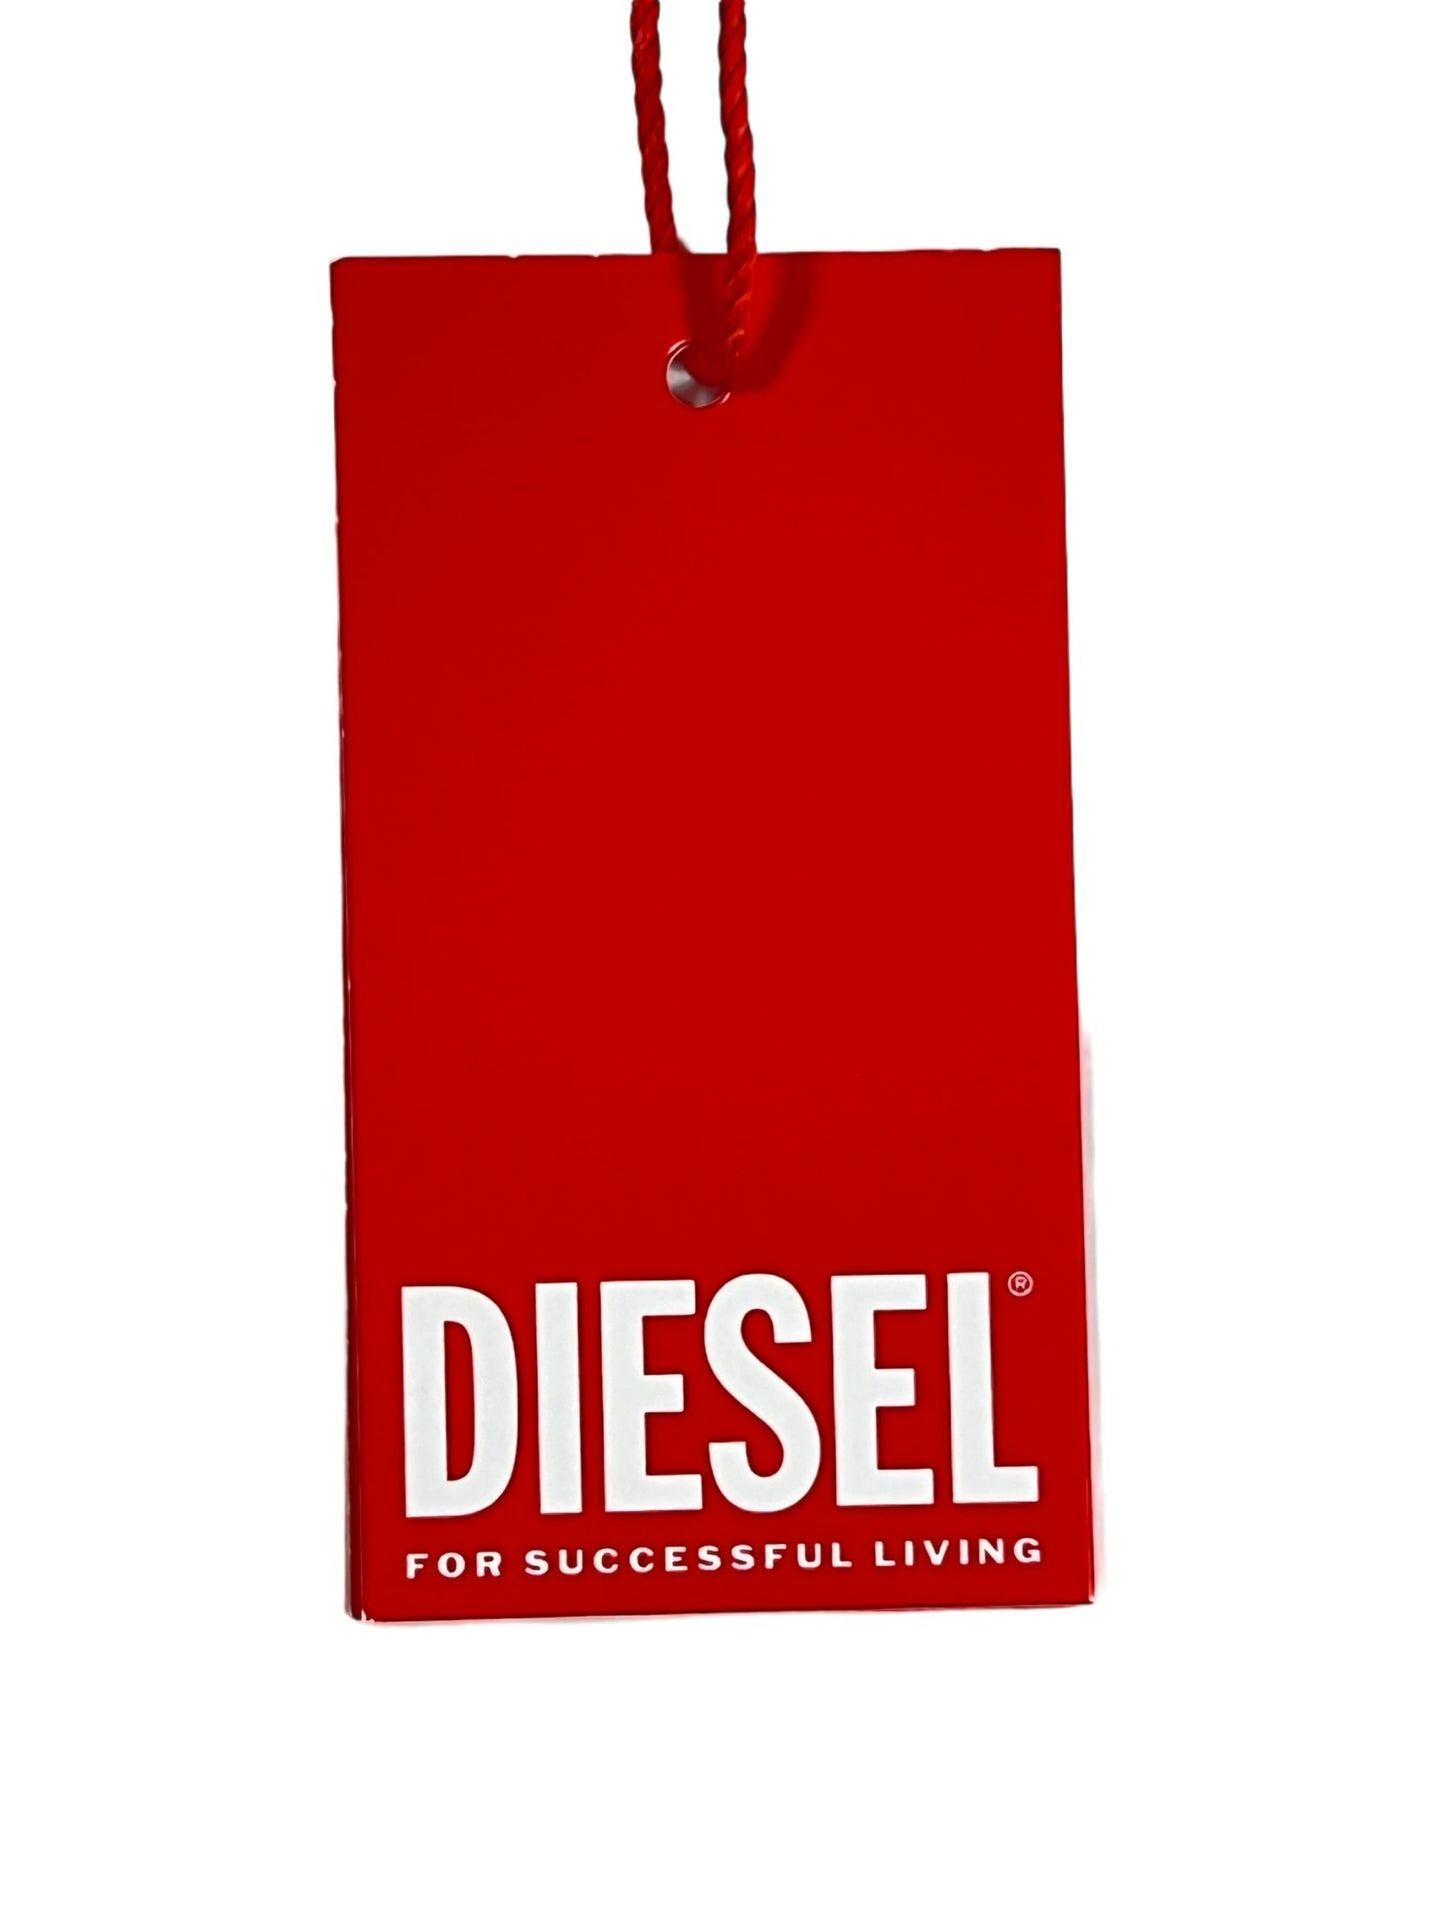 A red DIESEL brand tag with the slogan "for successful living" displayed on it, now found on men's swimming shorts made from recycled fabric.